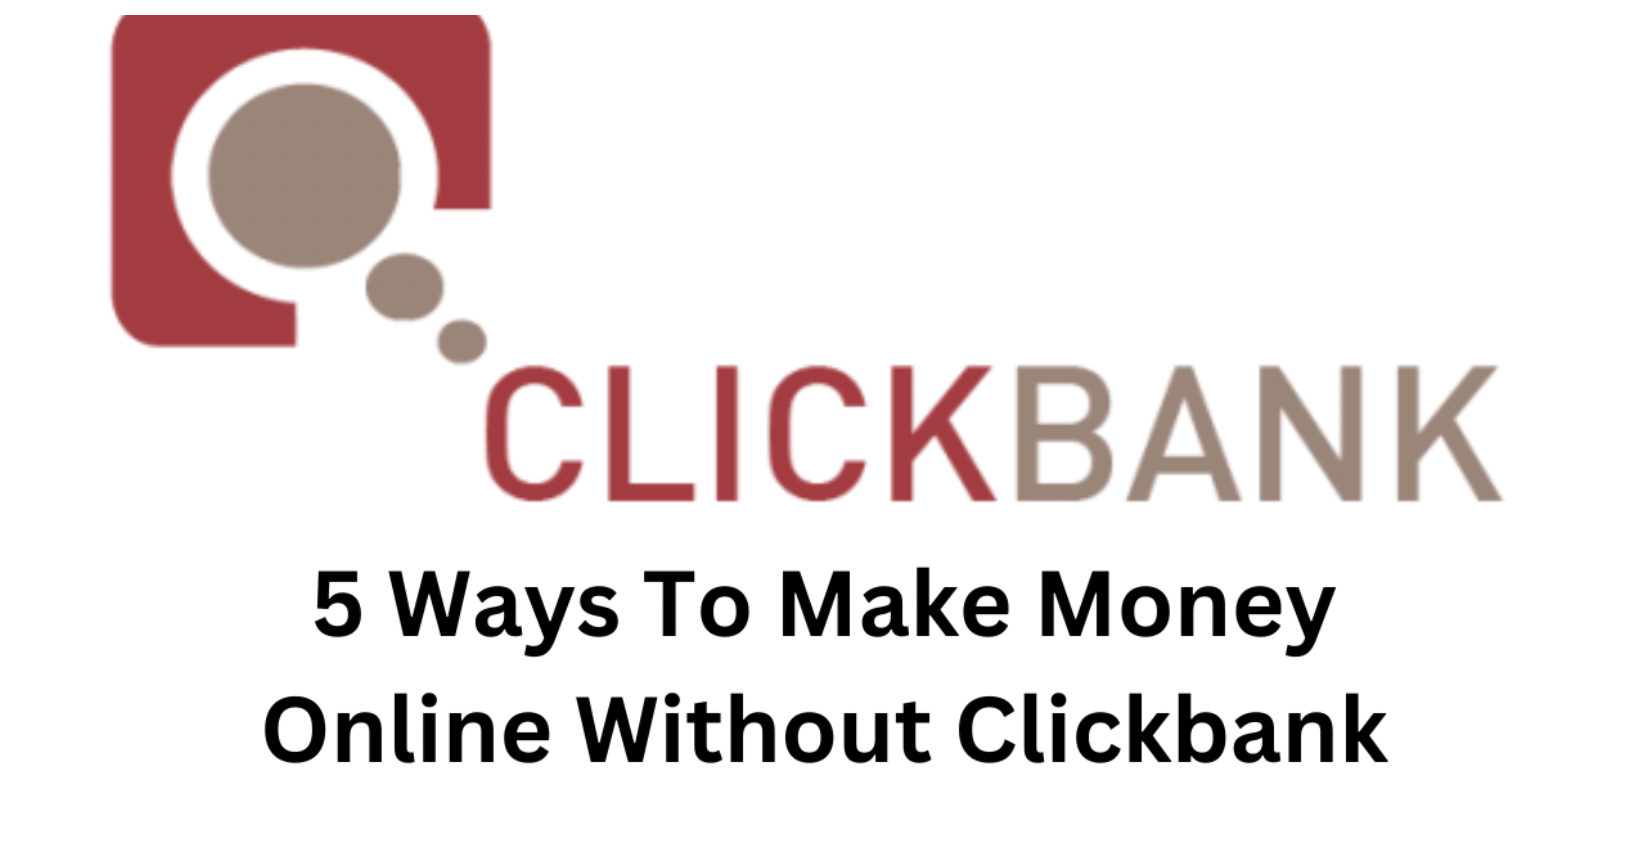 5 Ways To Make Money Online Without Clickbank